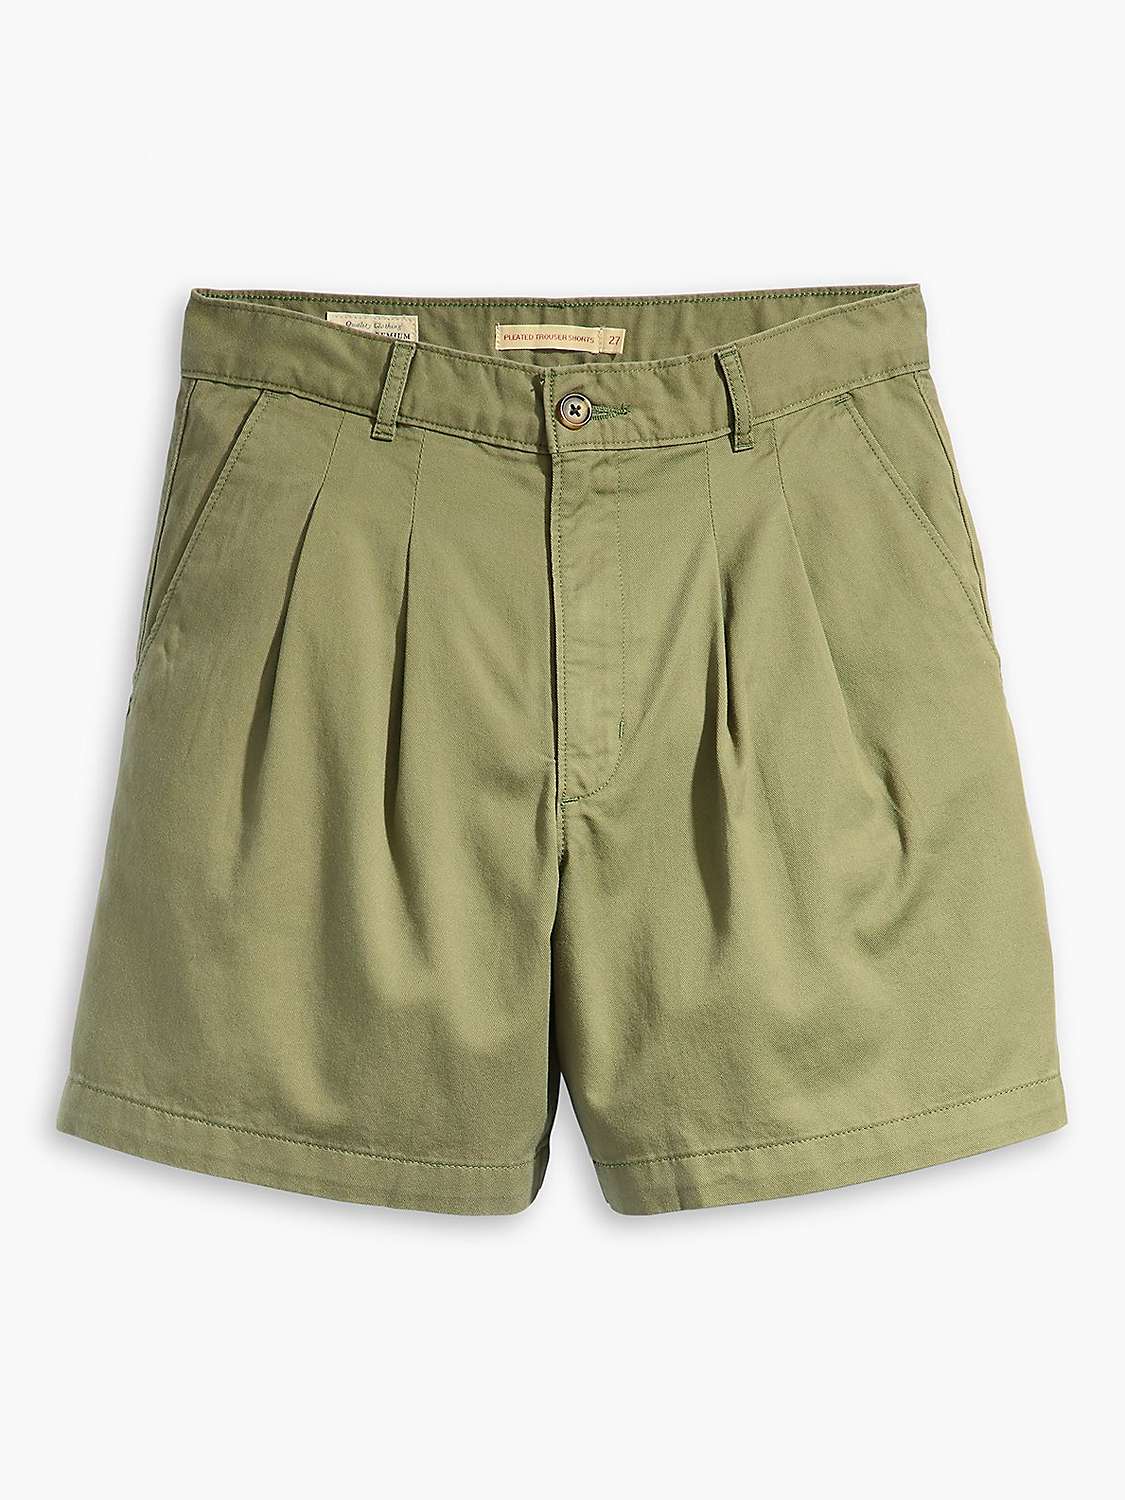 Buy Levi's High Rise Pleated Chino Shorts, Deep Lichen Green Online at johnlewis.com